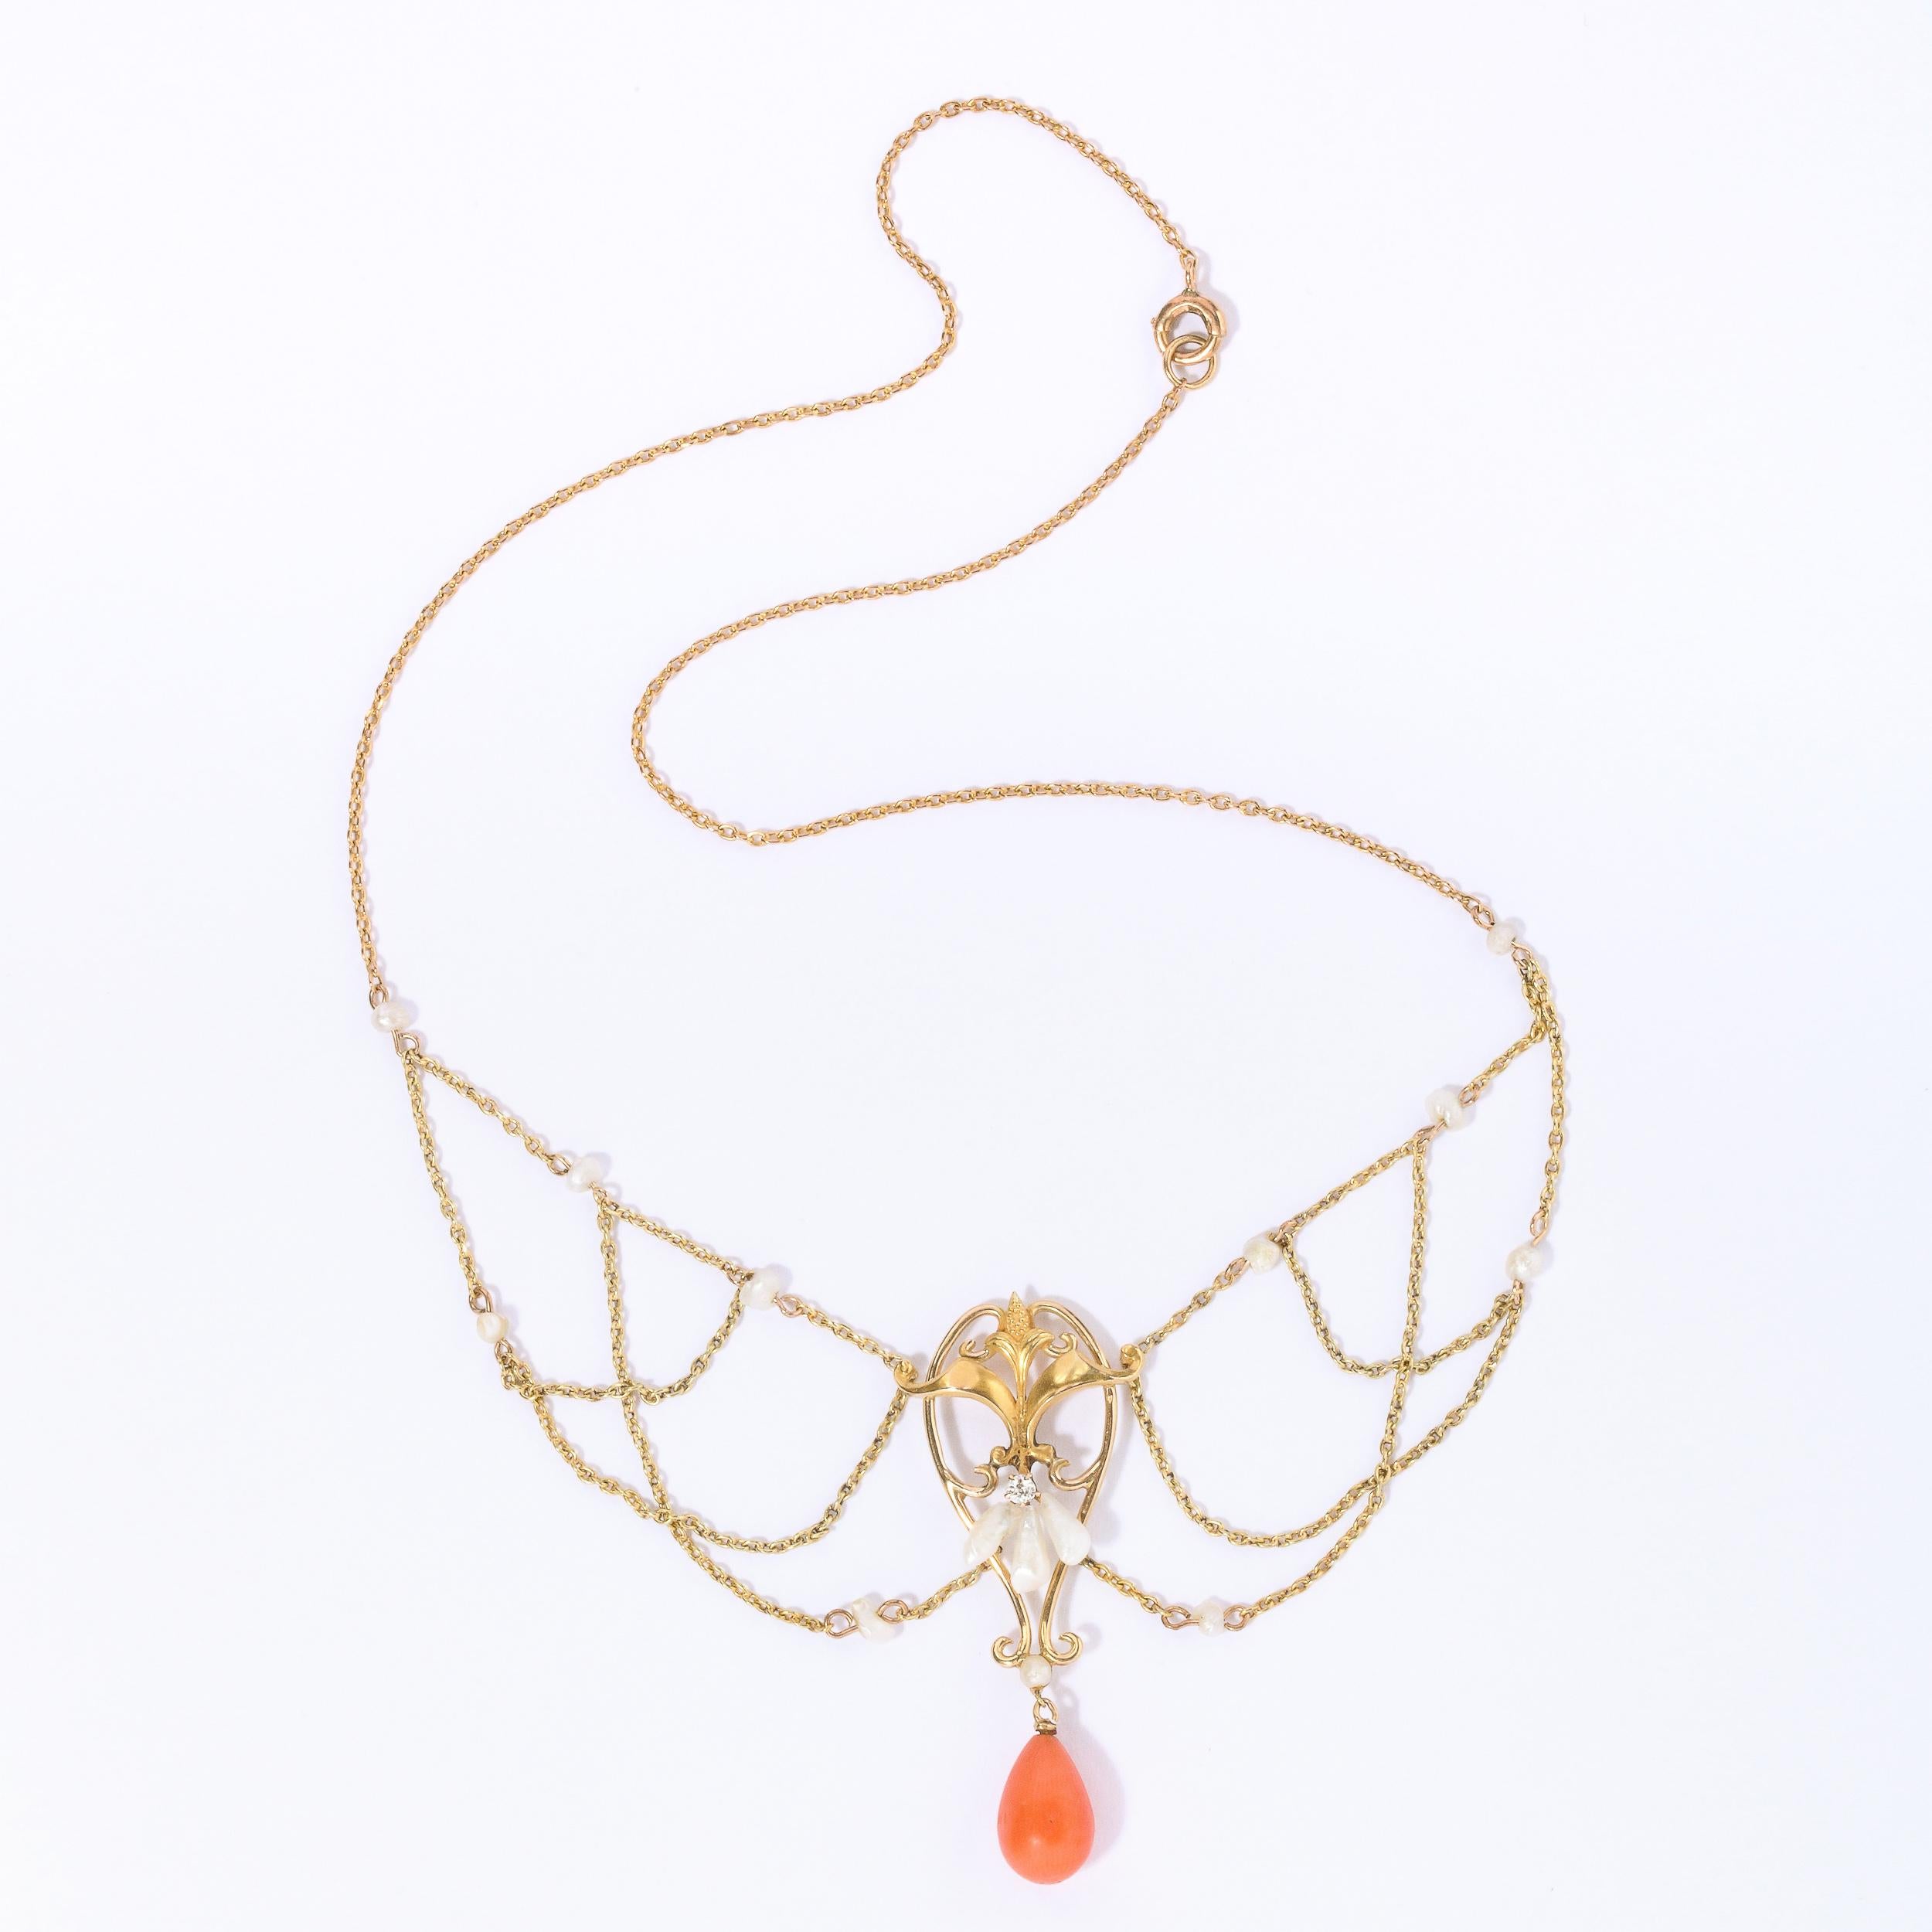 Women's Art Nouveau 14k Gold, Pearl, Coral and Diamond Swag Necklace For Sale